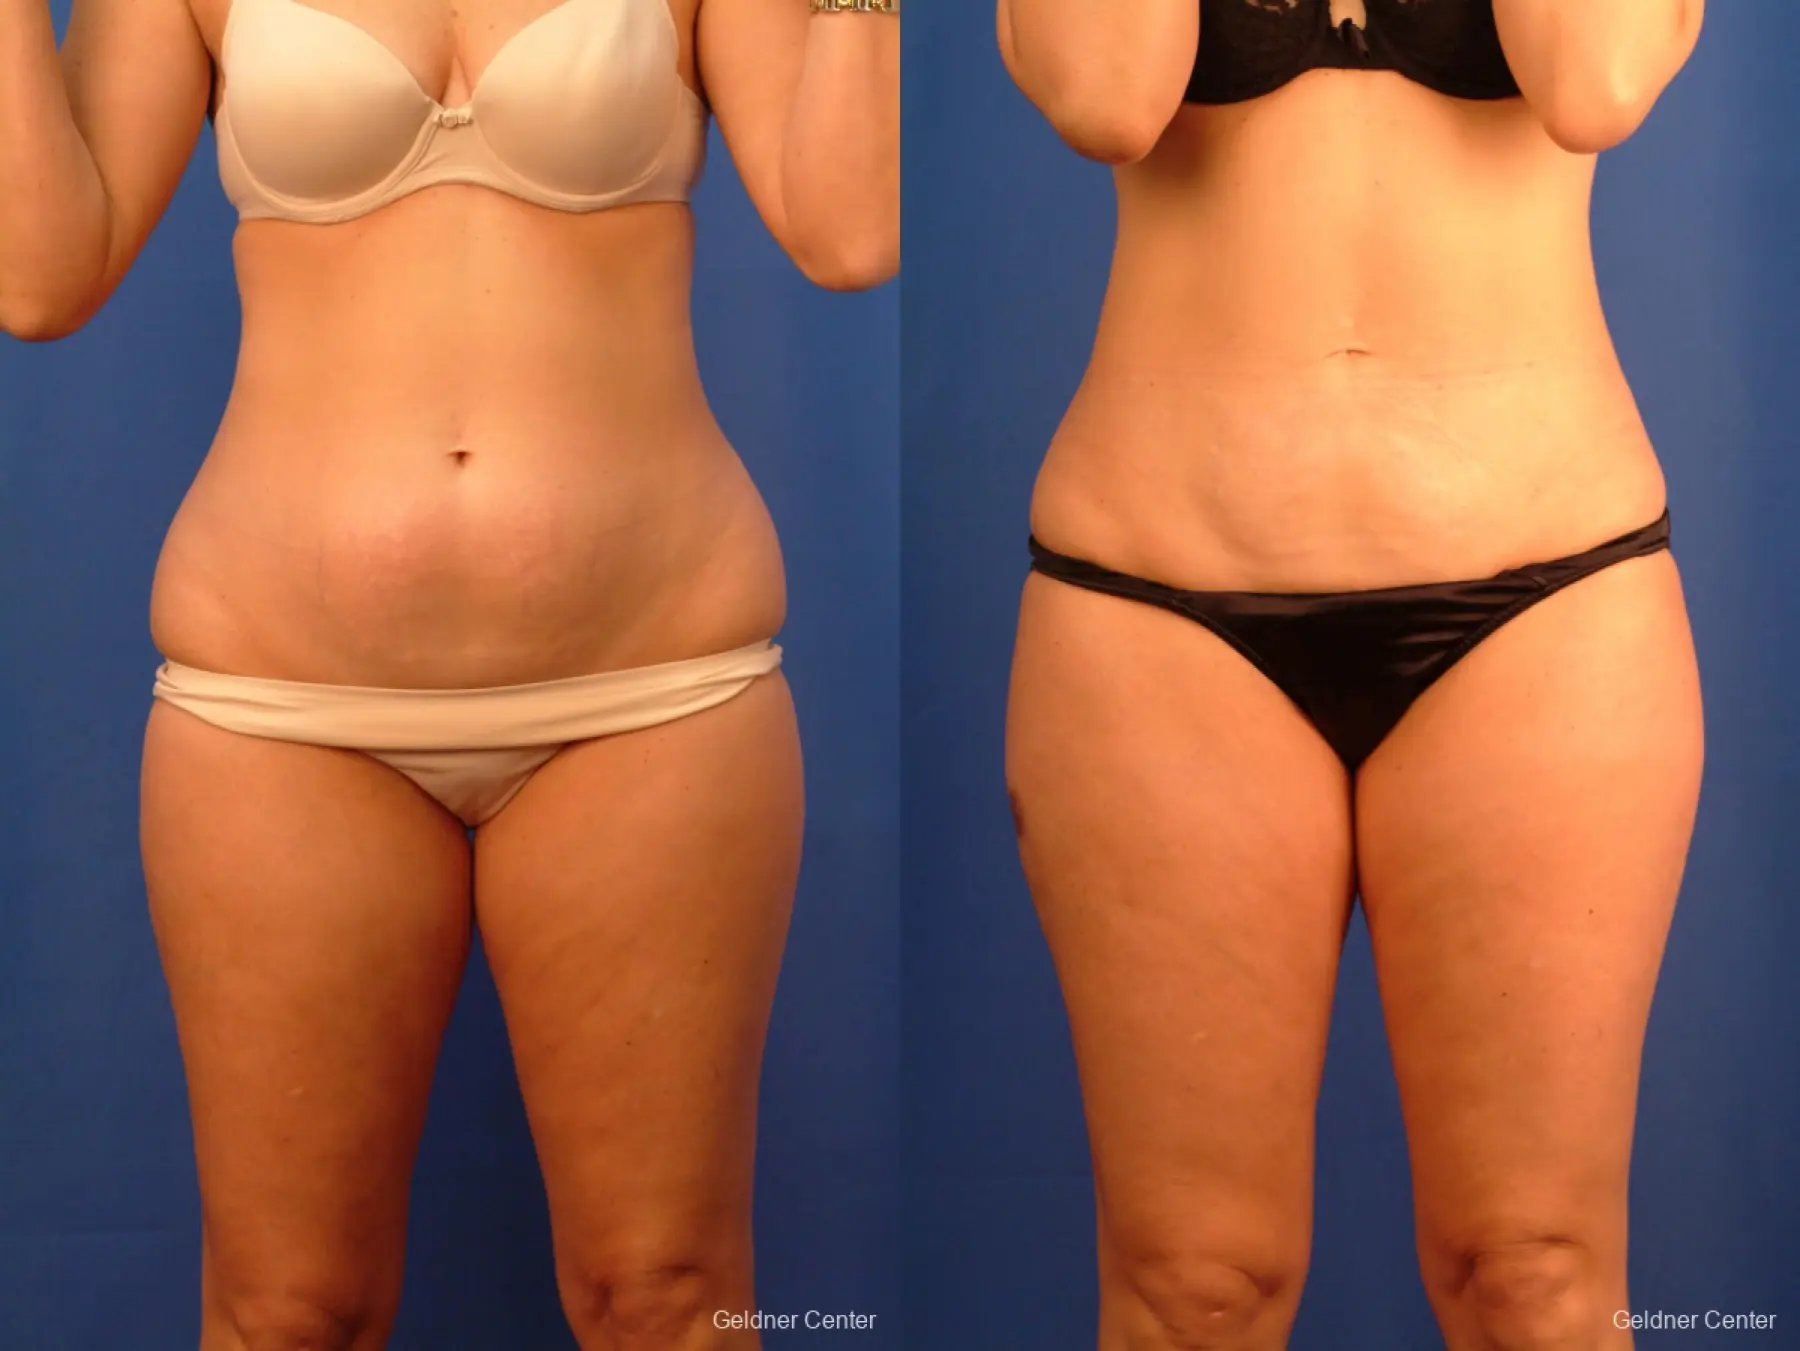 Vaser lipo patient 2520 before and after photos - Before and After